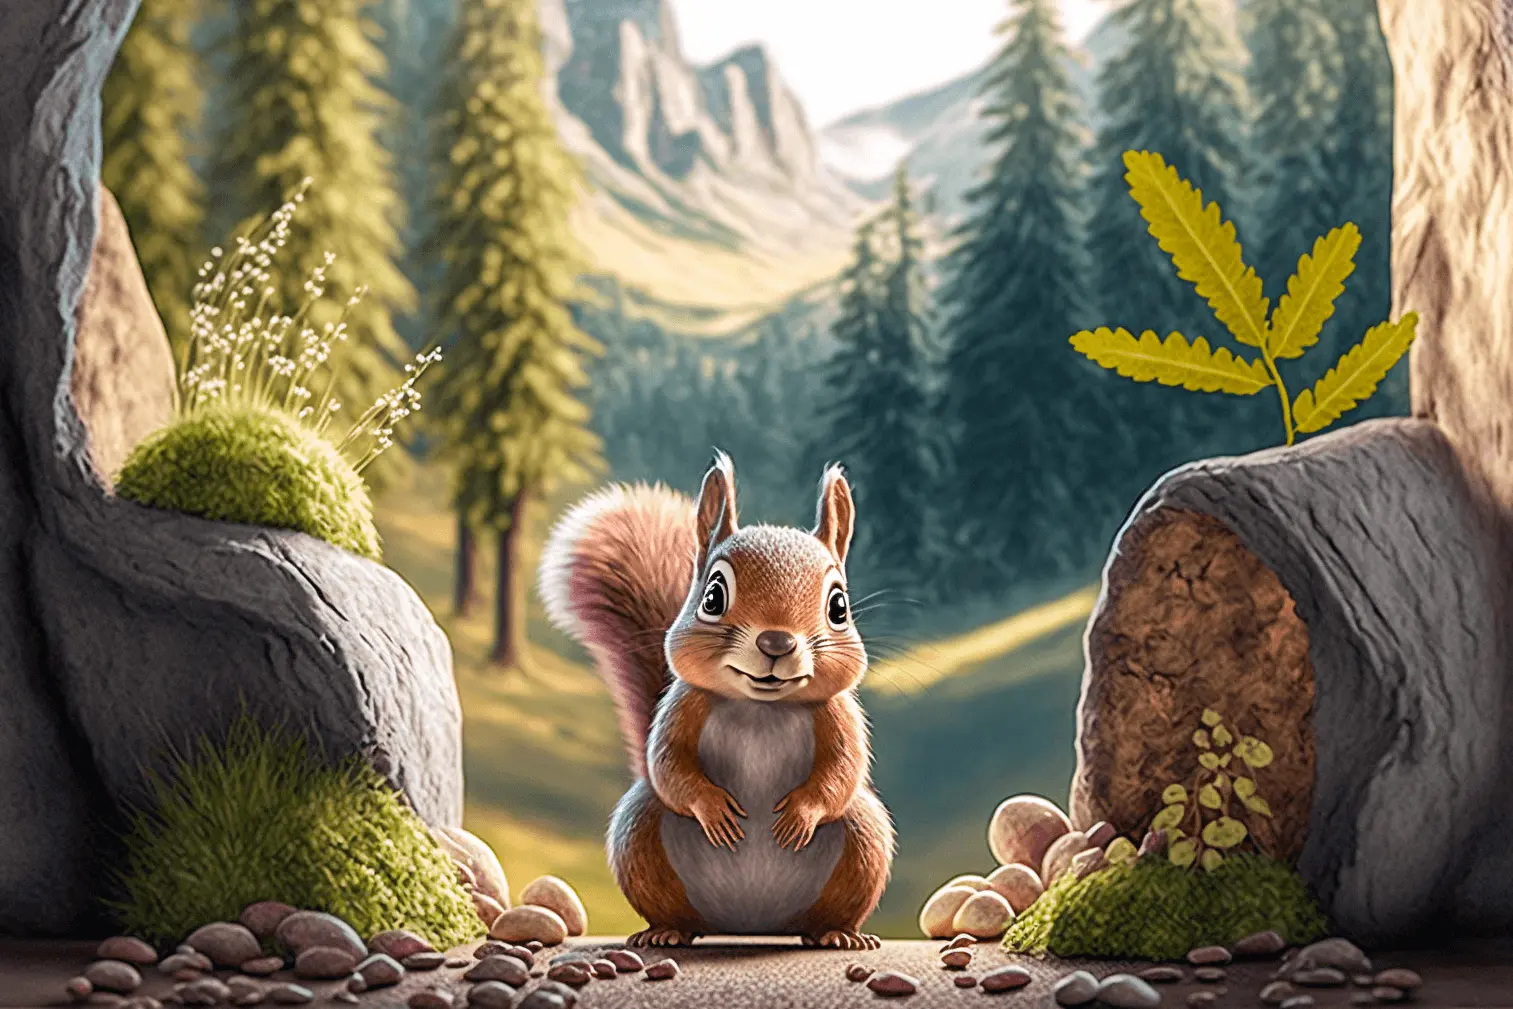 Squirrel Illustration of Squirrel in a Mountain Woodland